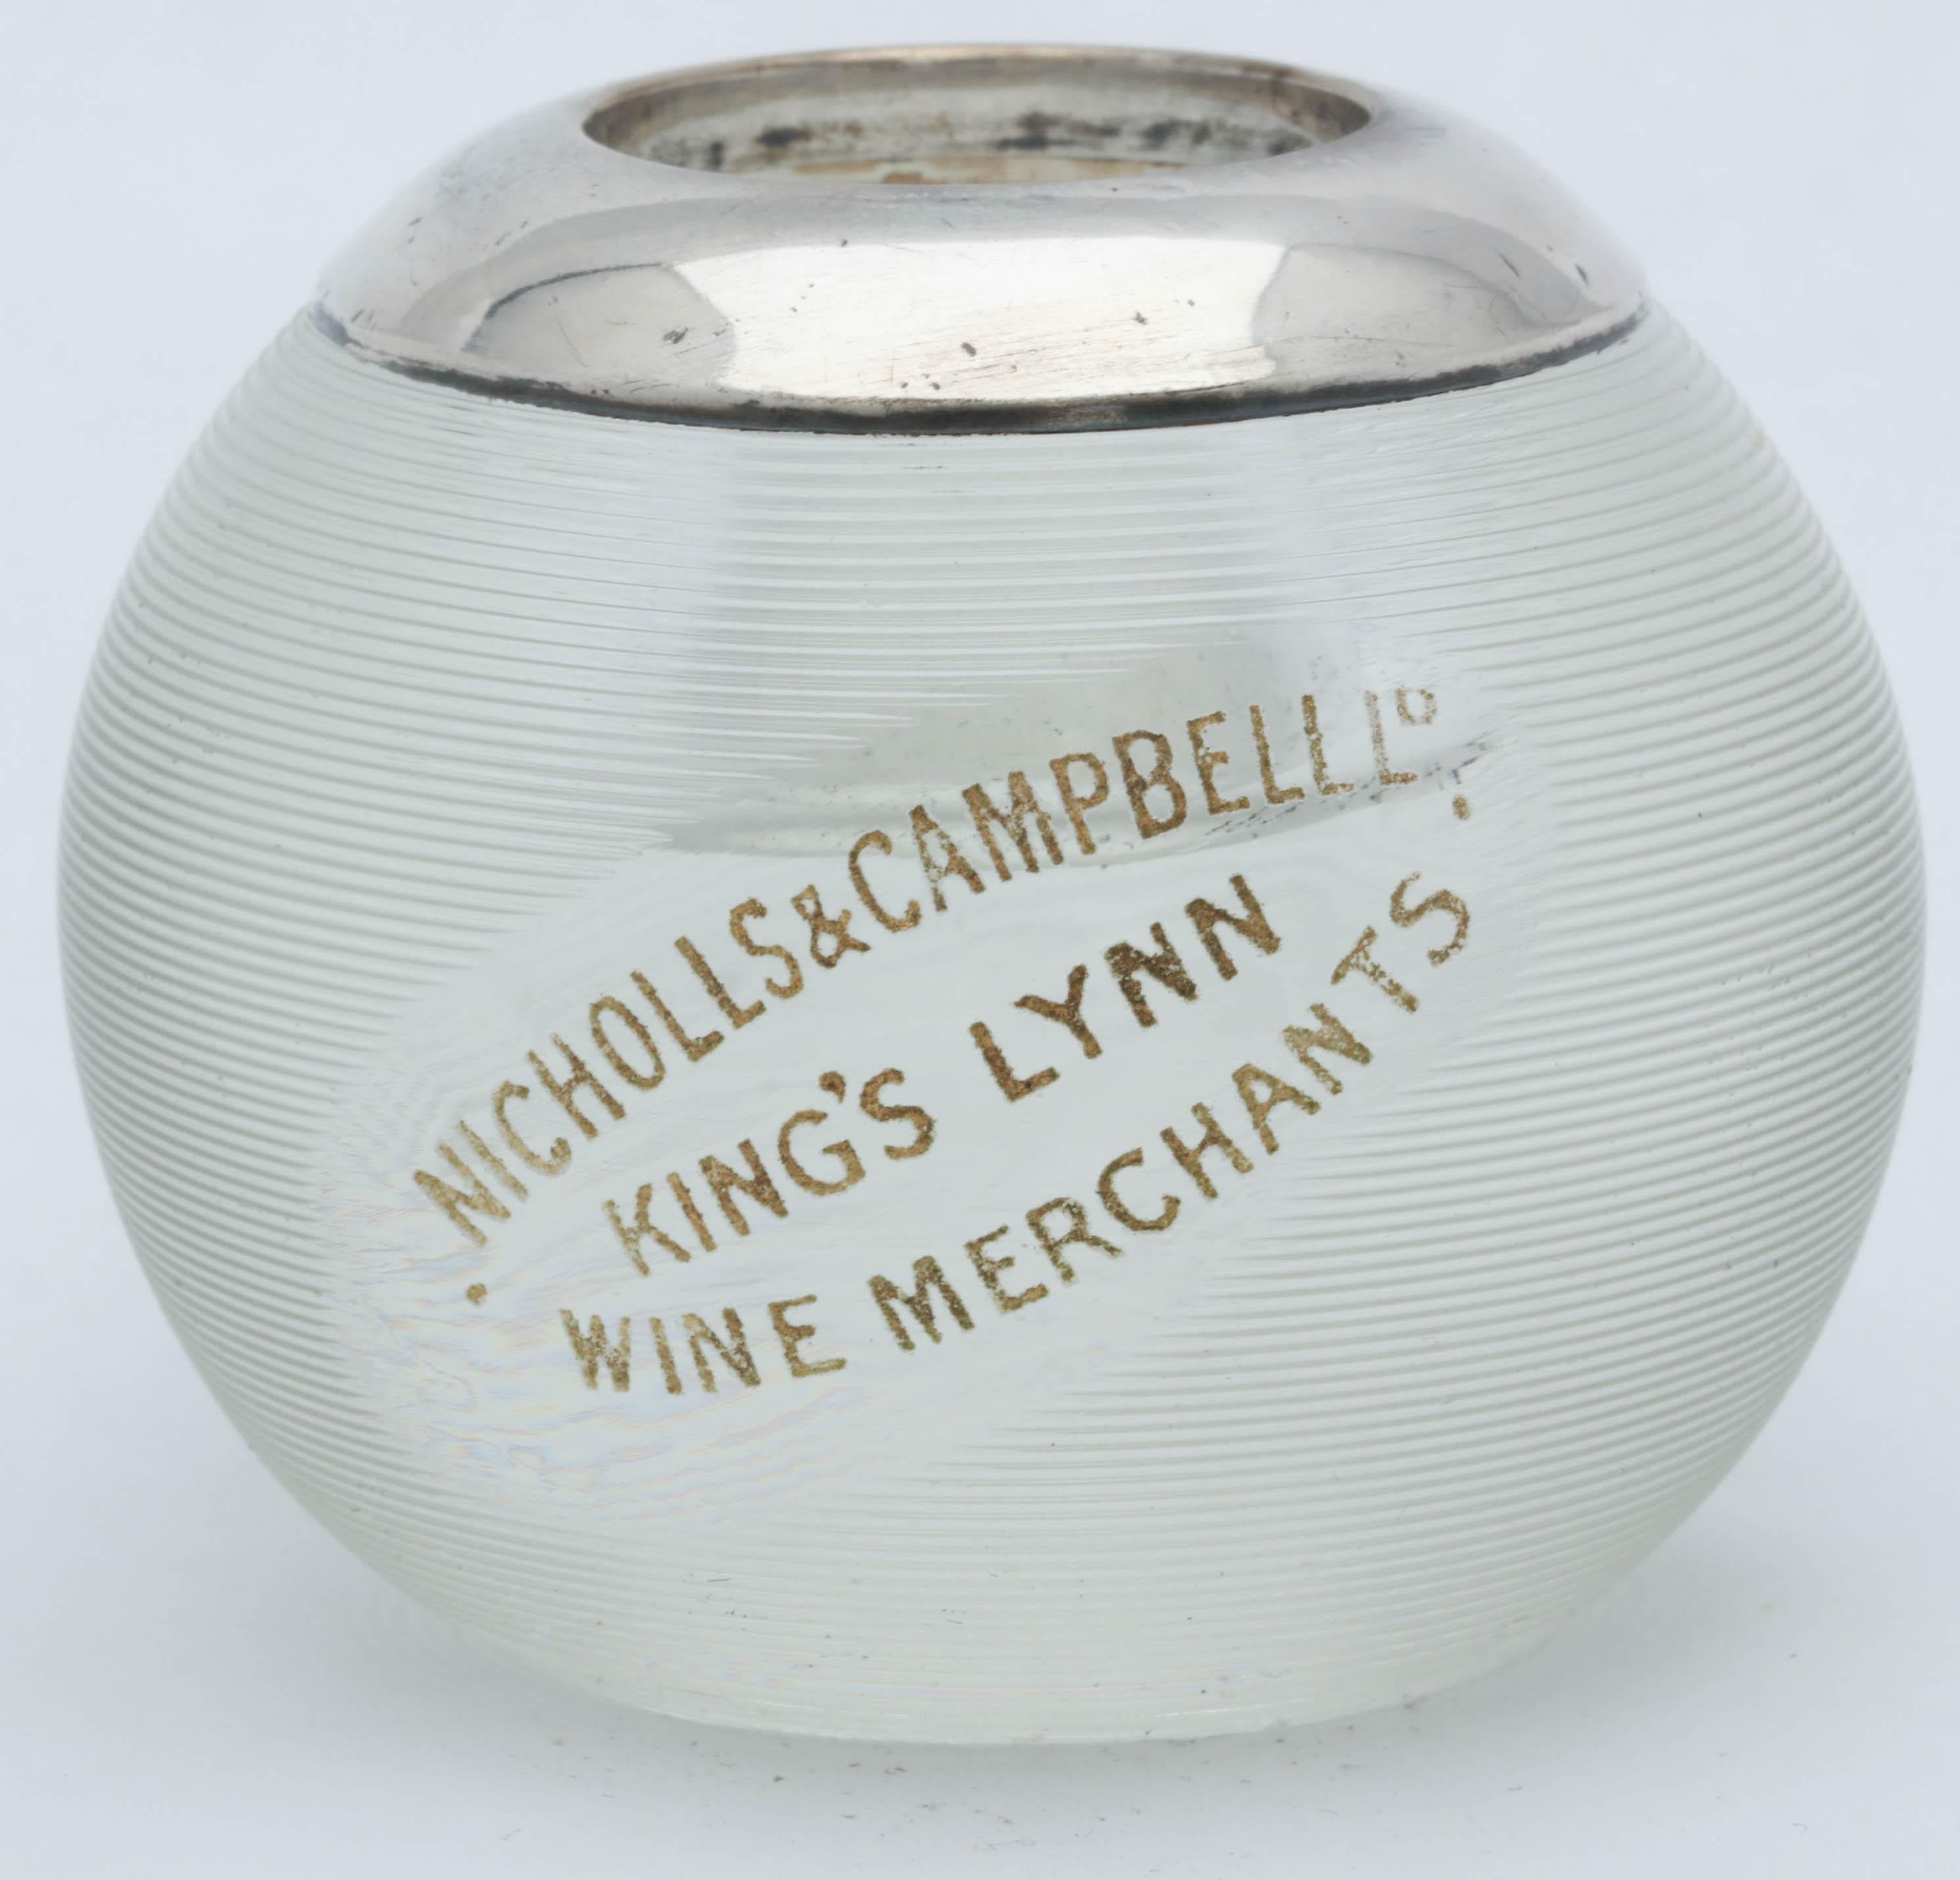 Unusual, large, Edwardian, sterling silver mounted, threaded crystal match striker, Birmingham, England, 1904, Robert Jones -maker. Made for the Nicholls and Campbell Ltd. Wine Merchants Shop in King's Lynn, England. Our research shows that the